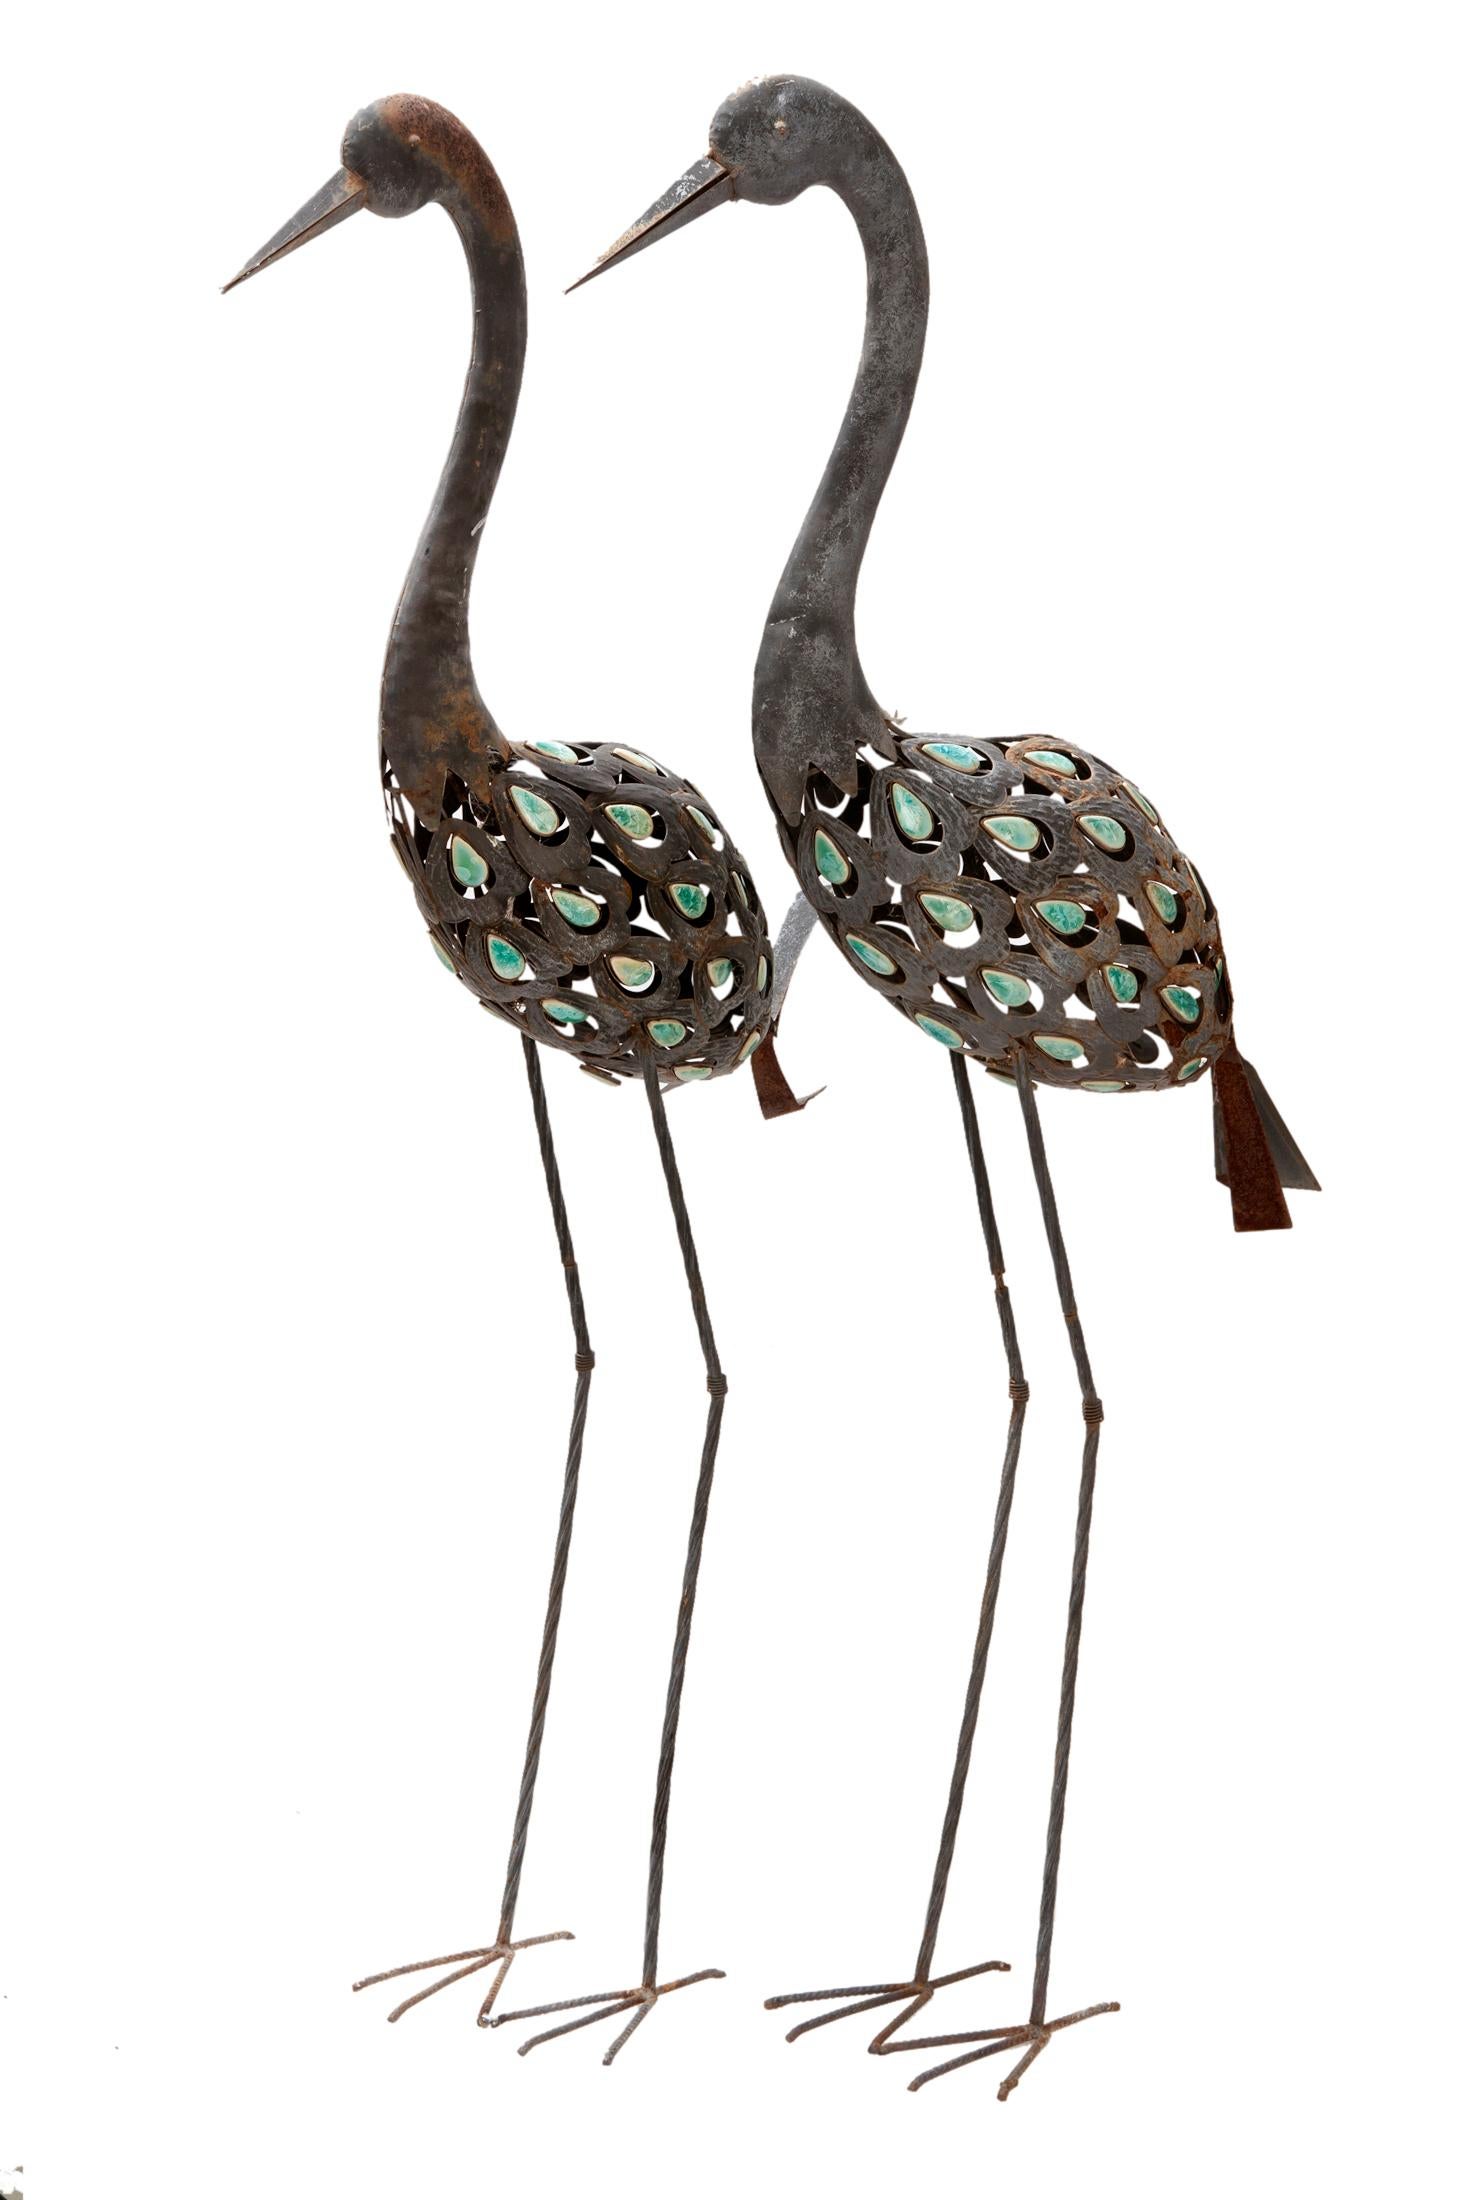 Vintage pair of shorebird statues on iron legs, the bodies are in metal with tear drop set stones in shades of turquoise. The metal is in good condition overall however there is some rust on the tails and a few spots on the bodies as well.
A